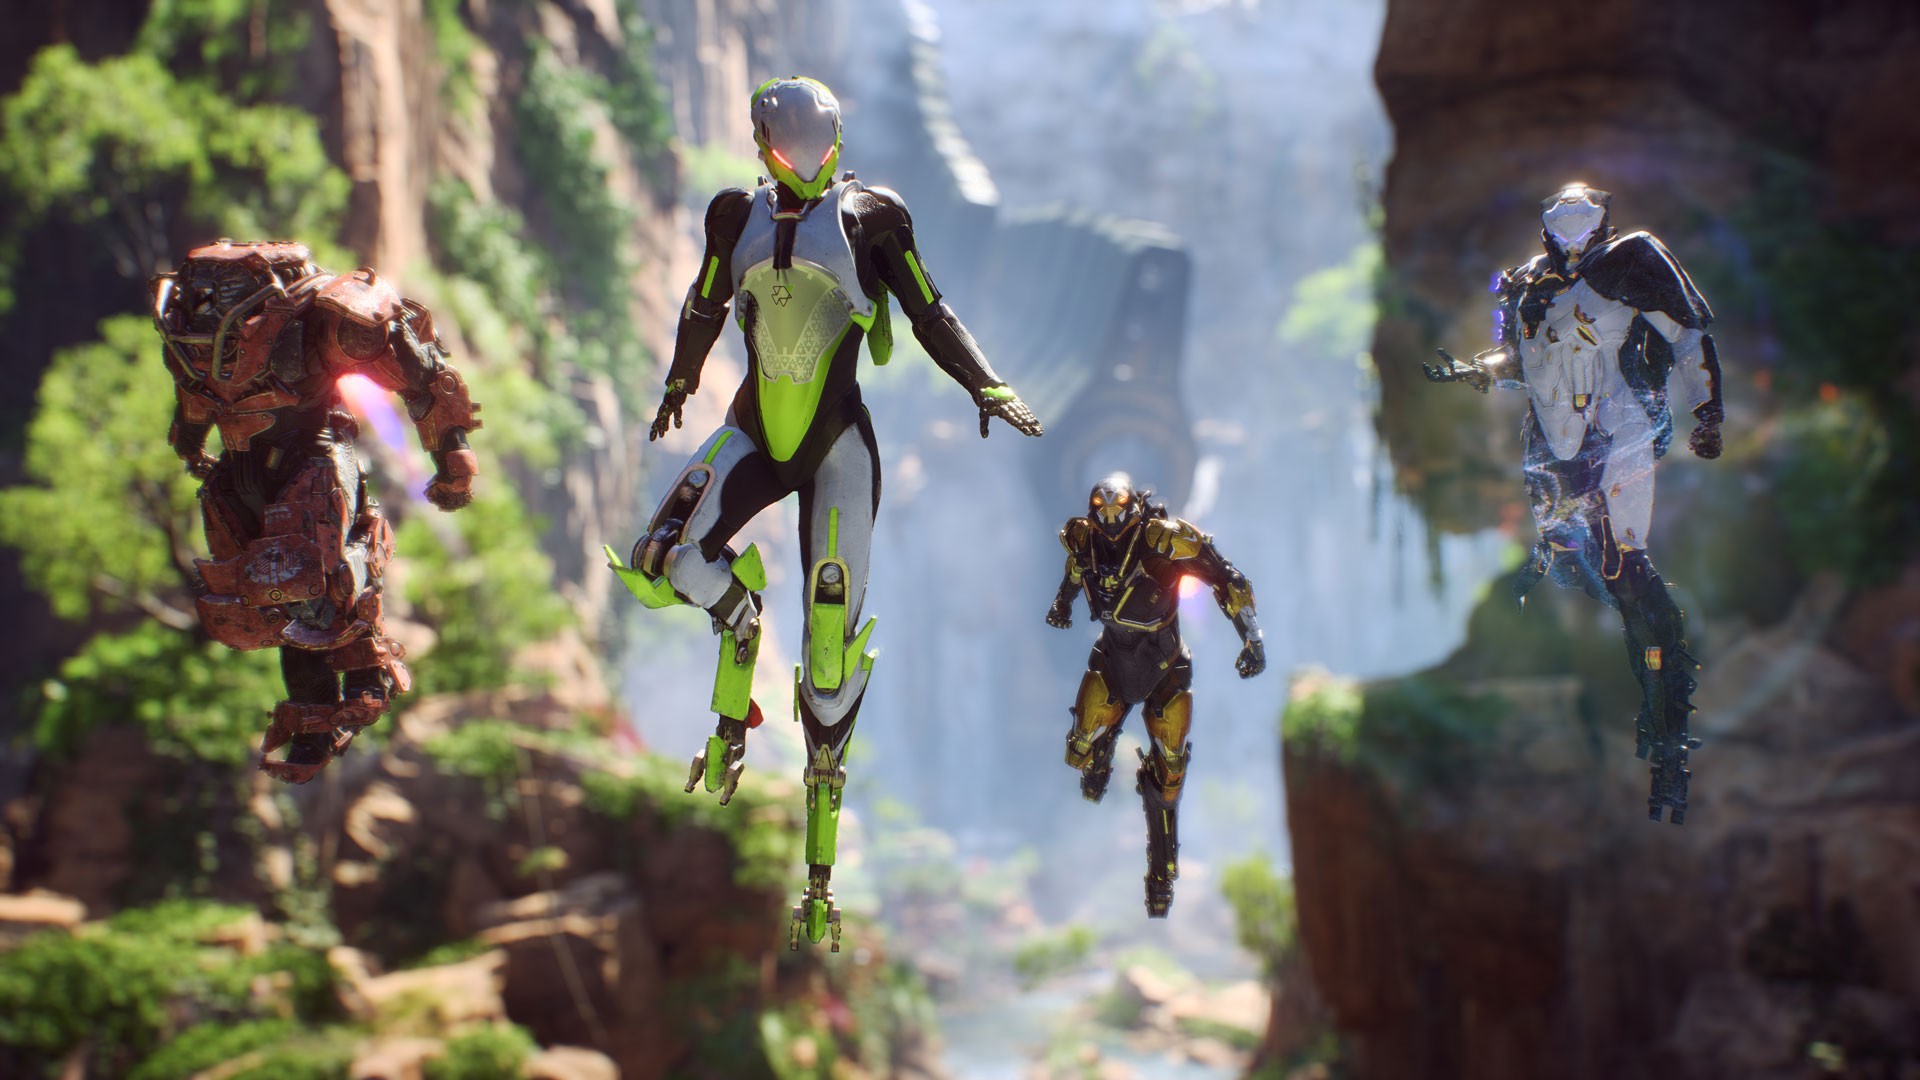 EA, Electronic Arts, BioWare, Anthem, PS4, XONE, PlayStation 4, Xbox One, US, Europe, Japan, Asia, gameplay, features, release date, price, trailer, screenshots, digital